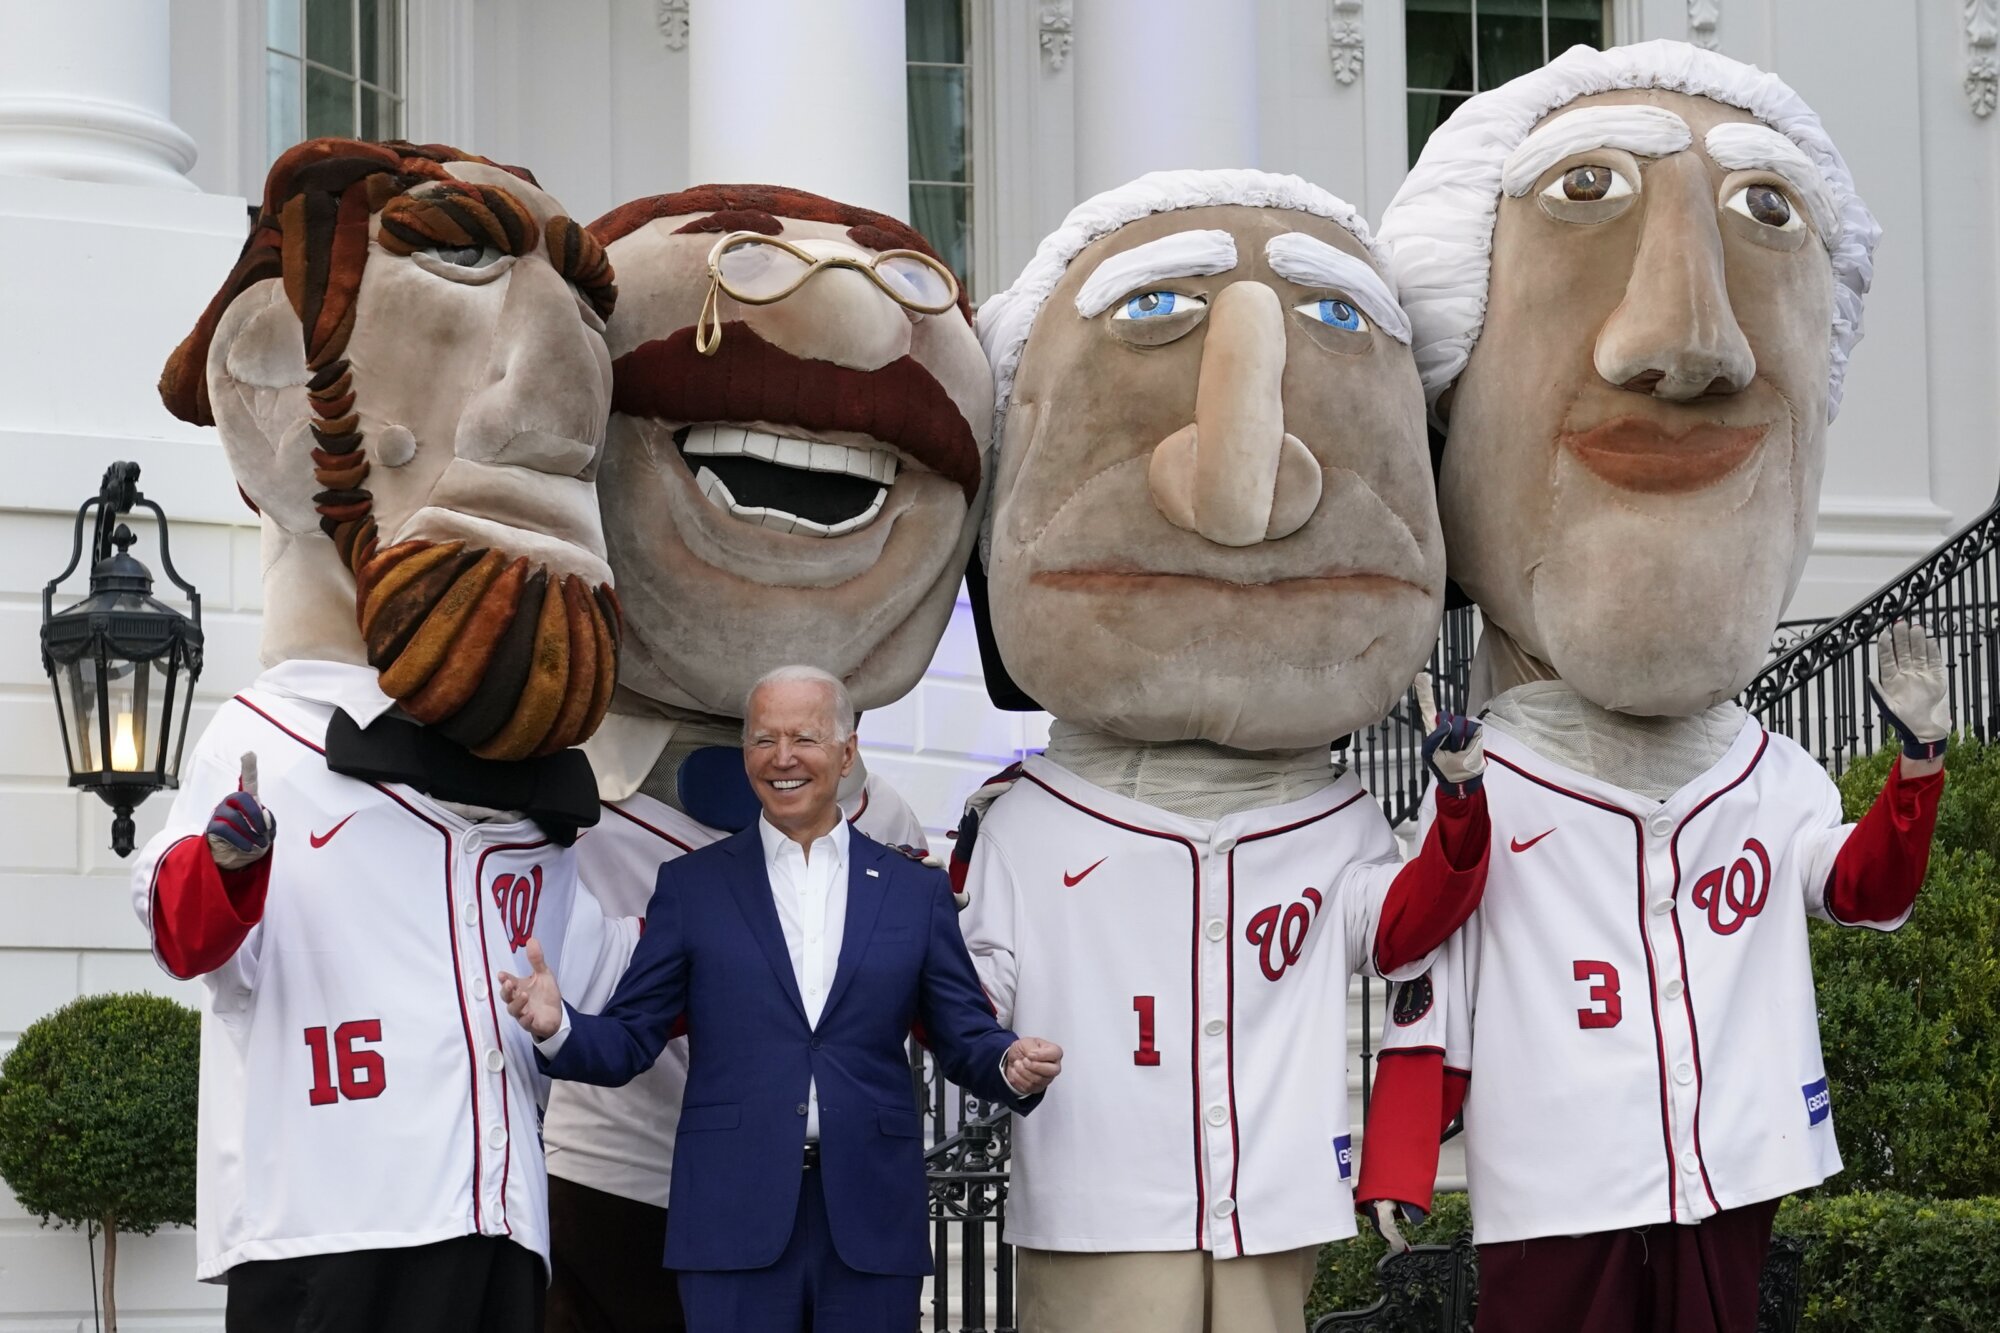 Running for president: The Nats hold mascot tryouts - WTOP News